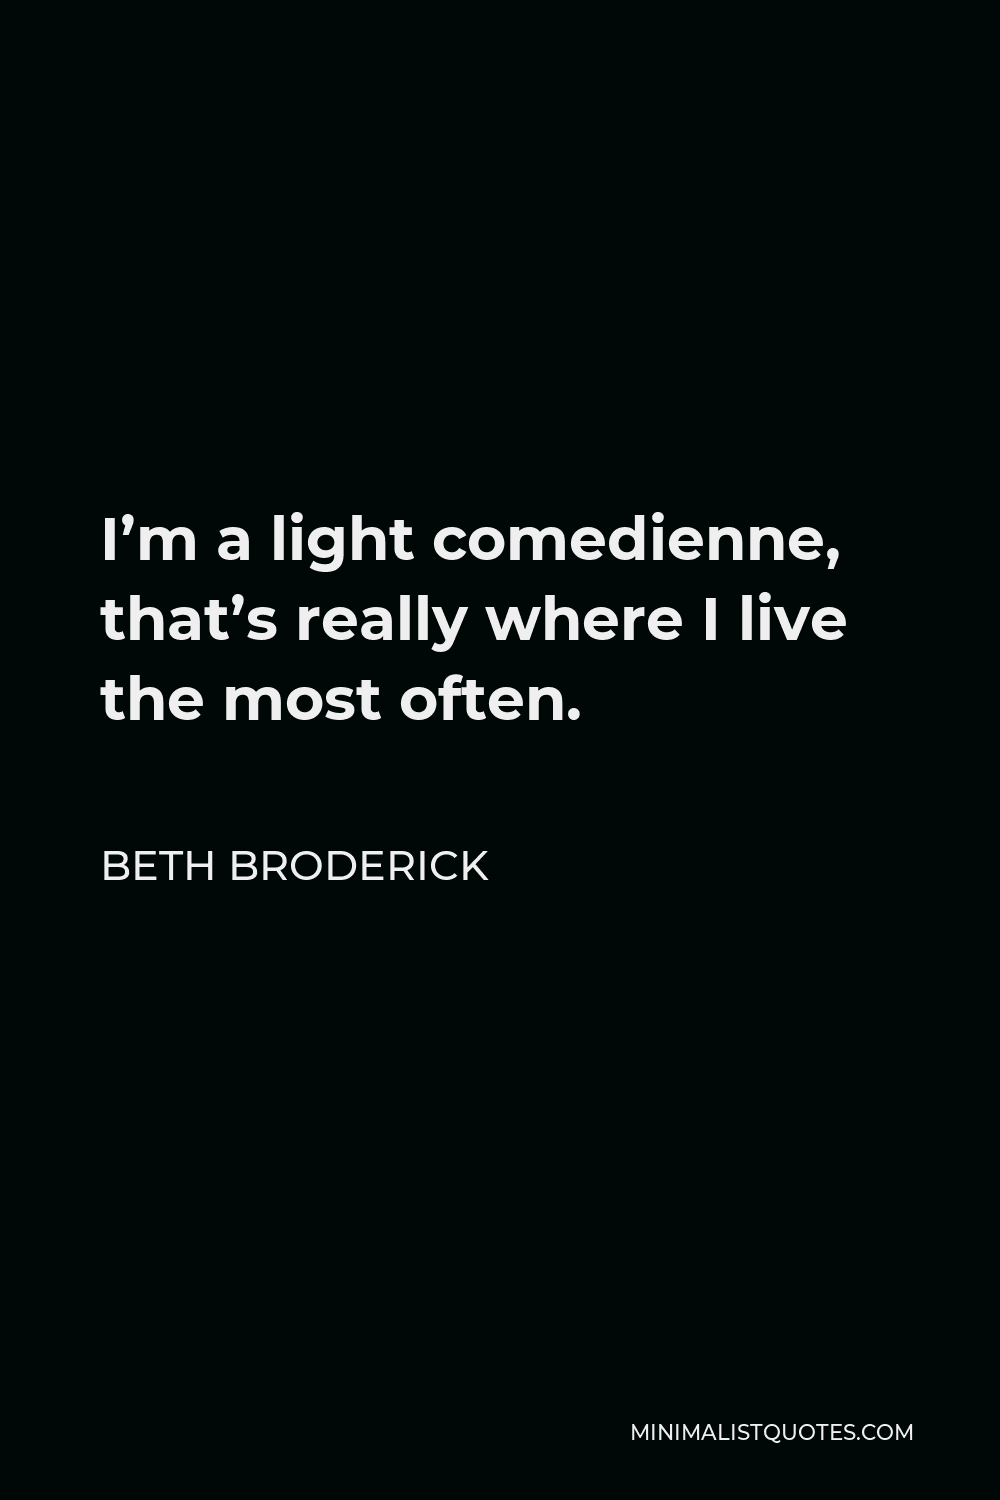 Beth Broderick Quote - I’m a light comedienne, that’s really where I live the most often.